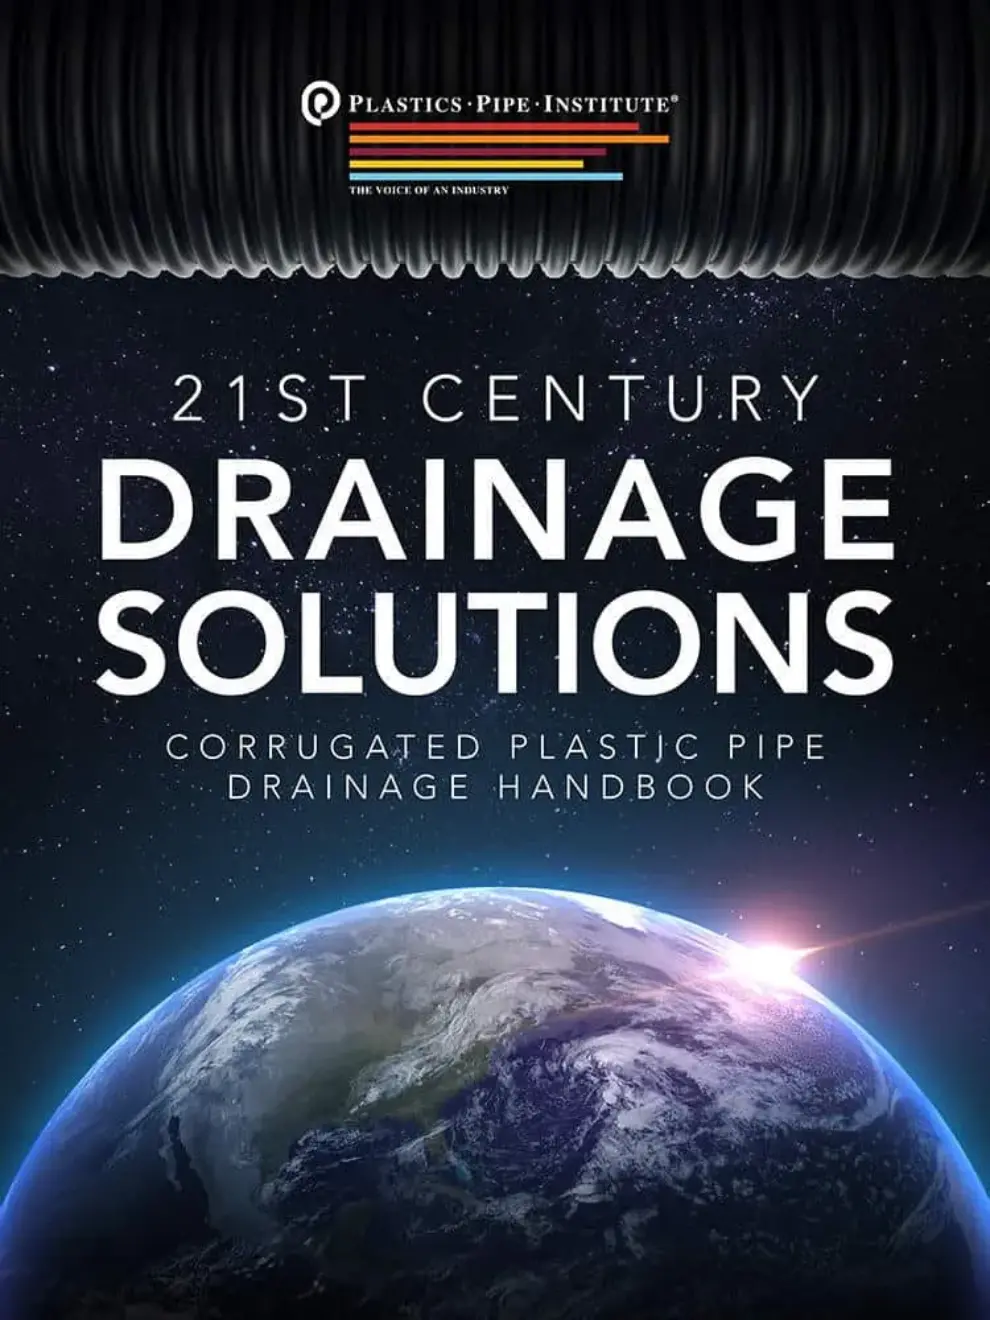 New Stormwater Drainage Handbook Announced by the Plastics Pipe Institute